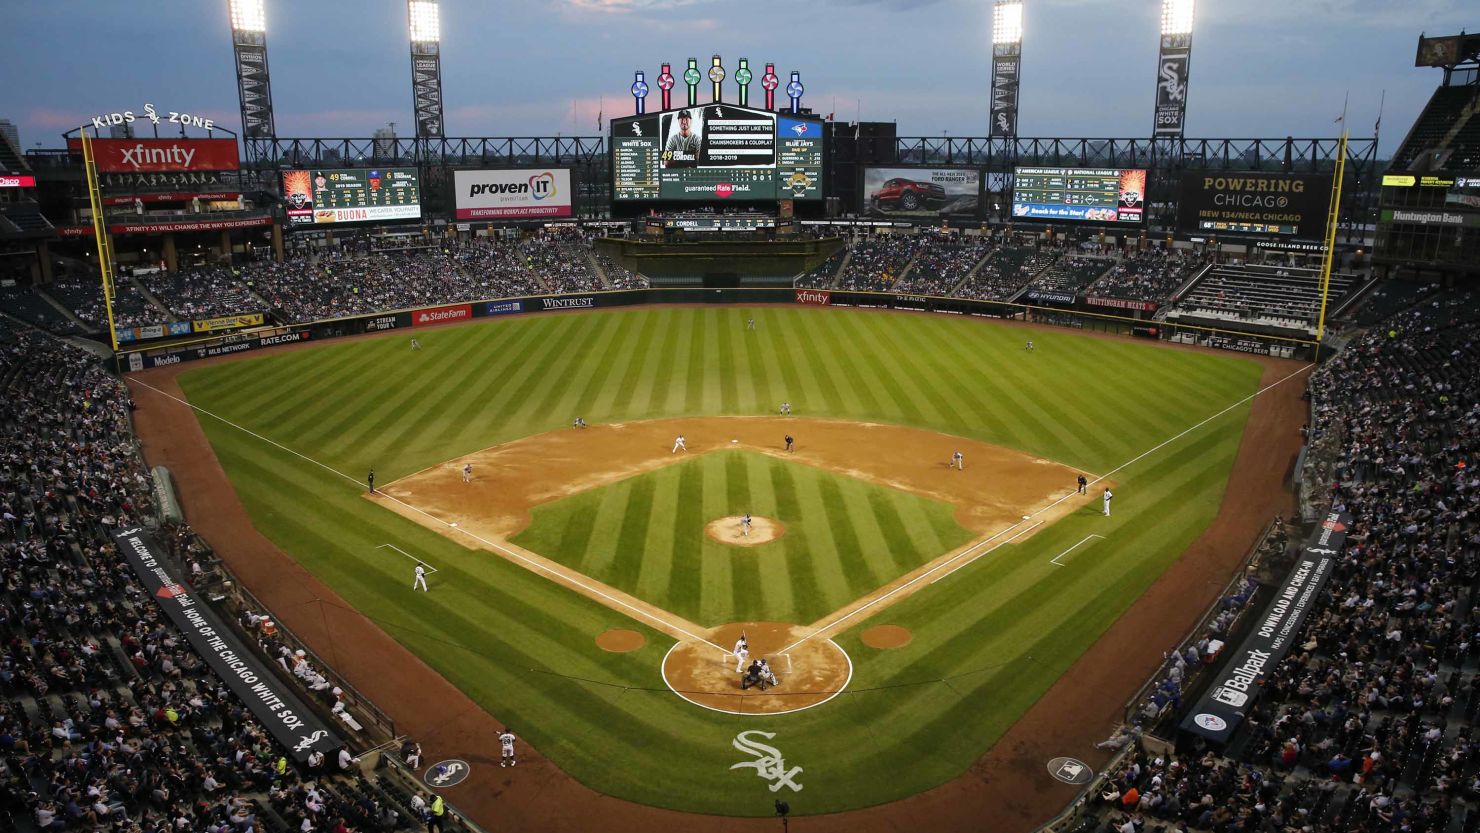 A general view at Guaranteed Rate Field as the Chicago White Sox take on the Toronto Blue Jays on May 16, 2019 in Chicago, Illinois. 